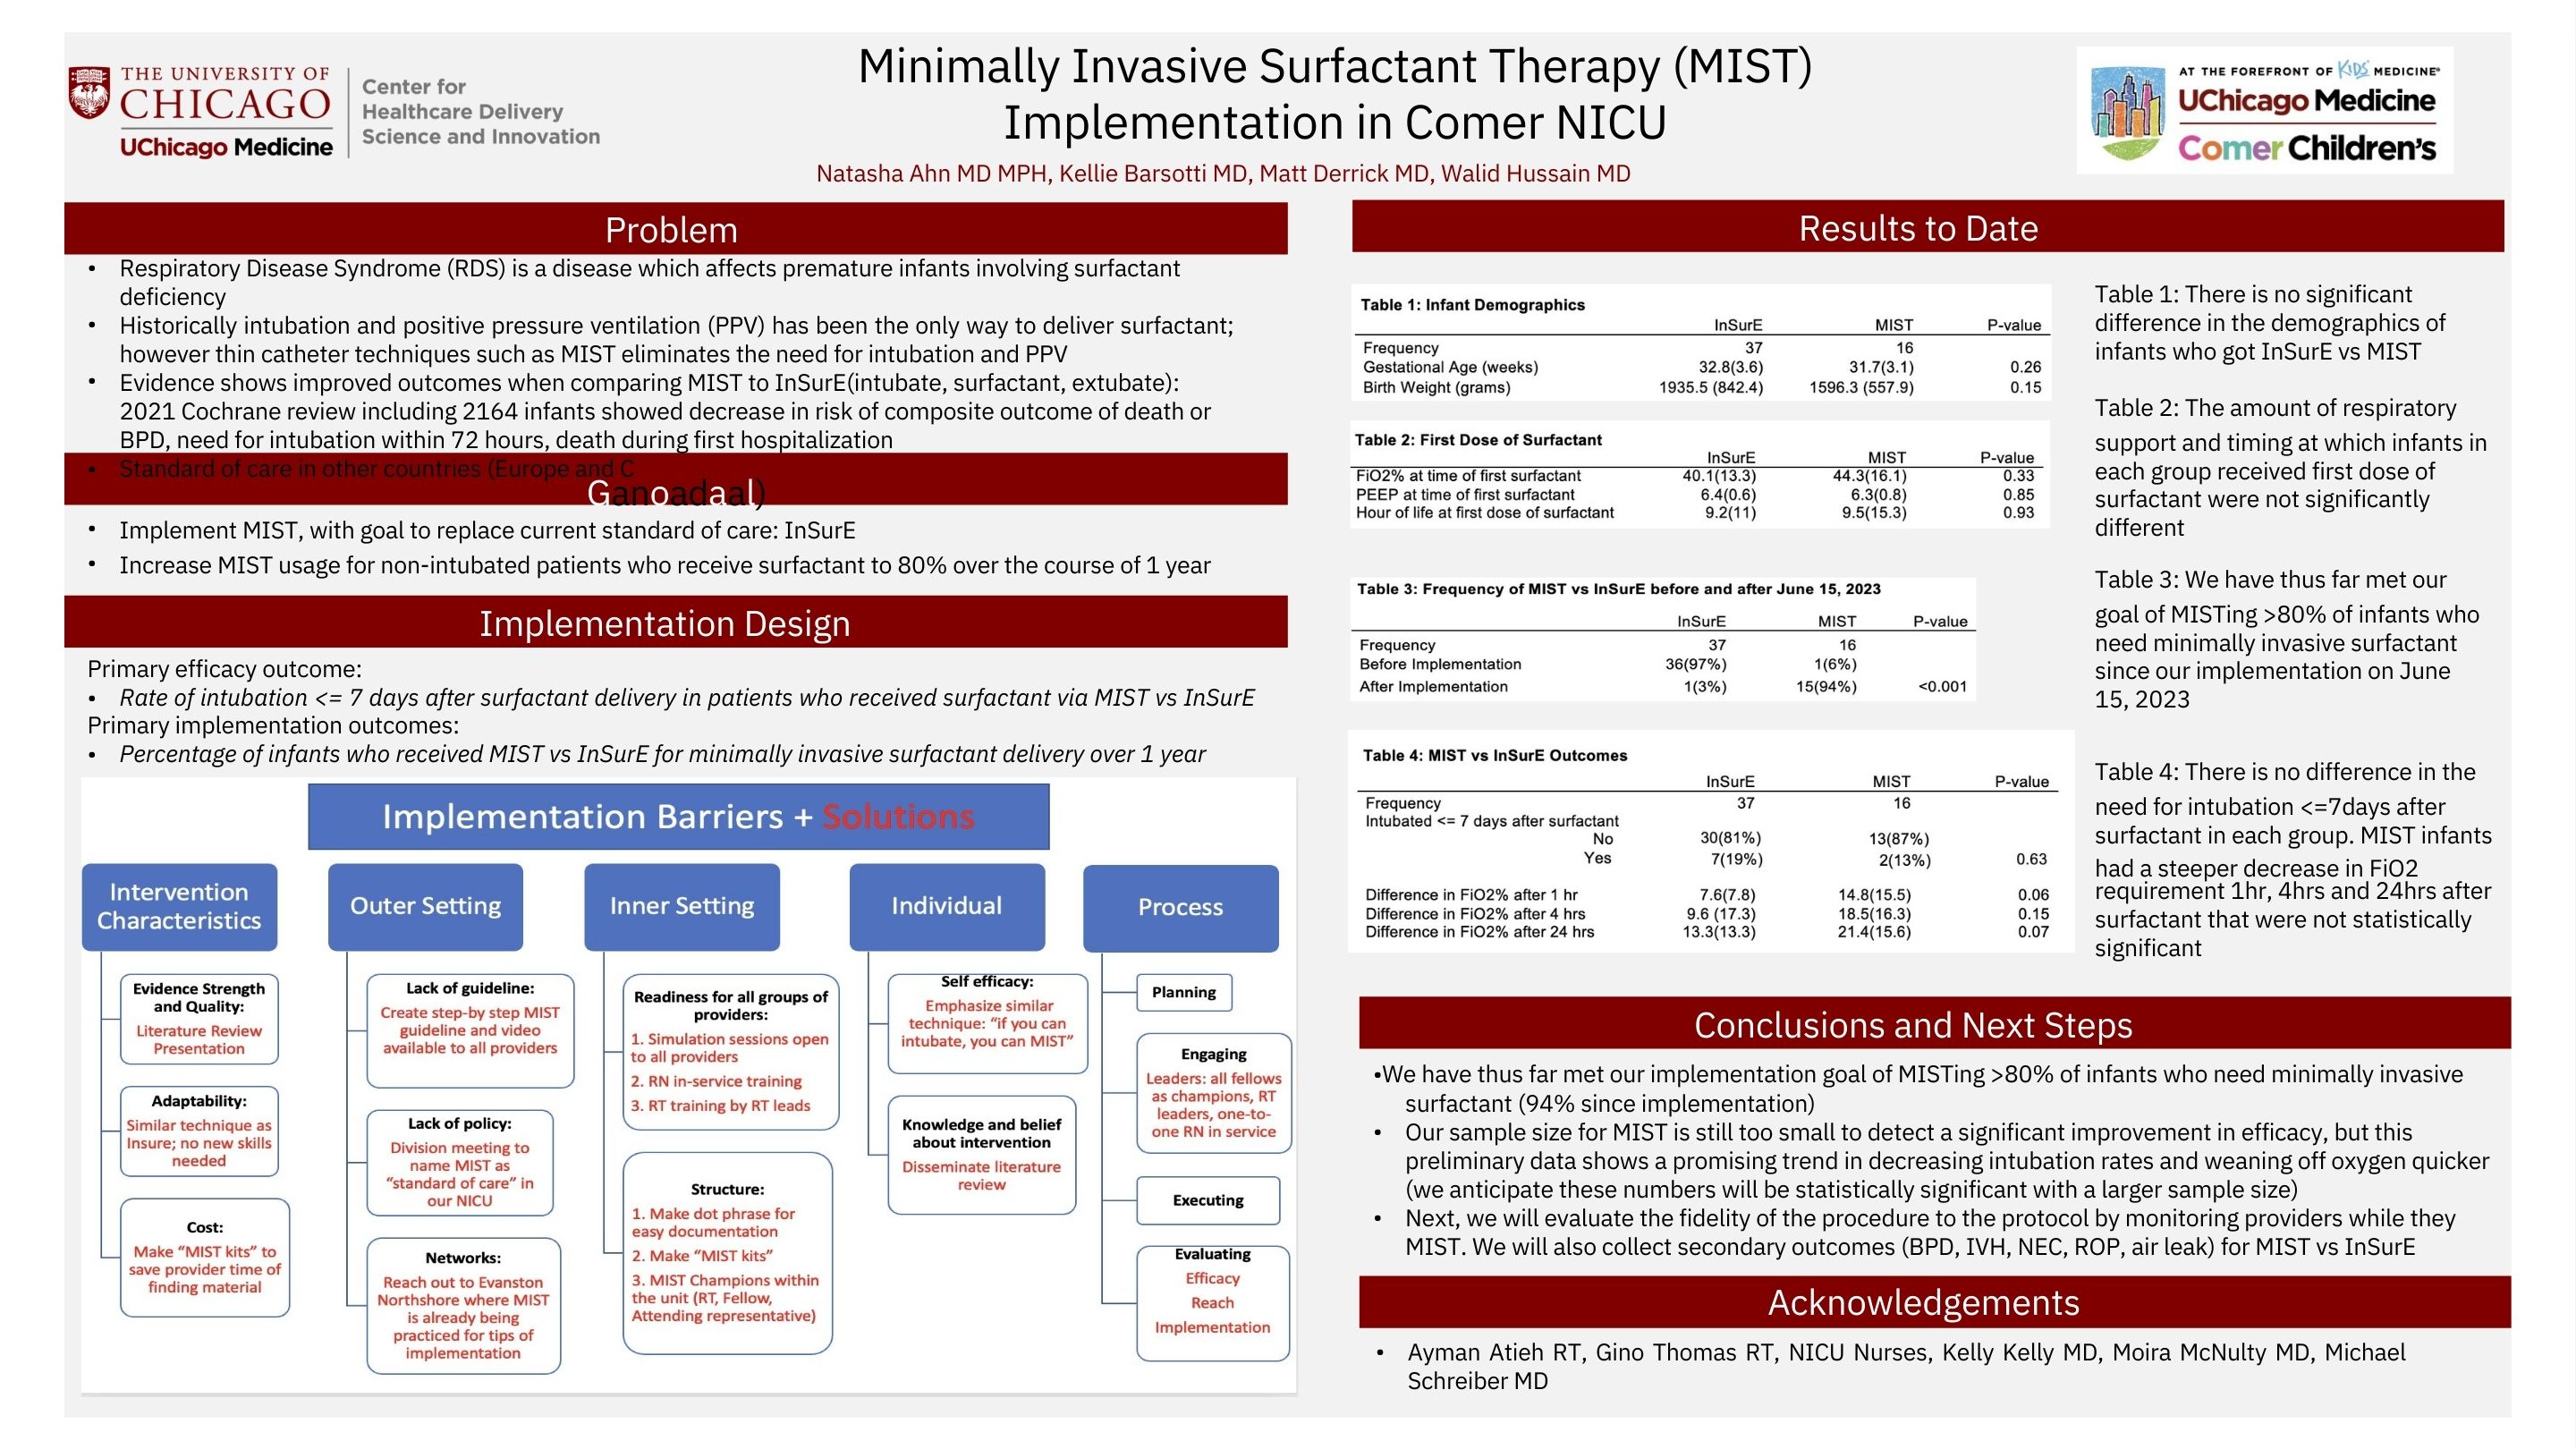 AHN_Minimally Invasive Surfactant Therapy MIST Implementation in Comer NICU